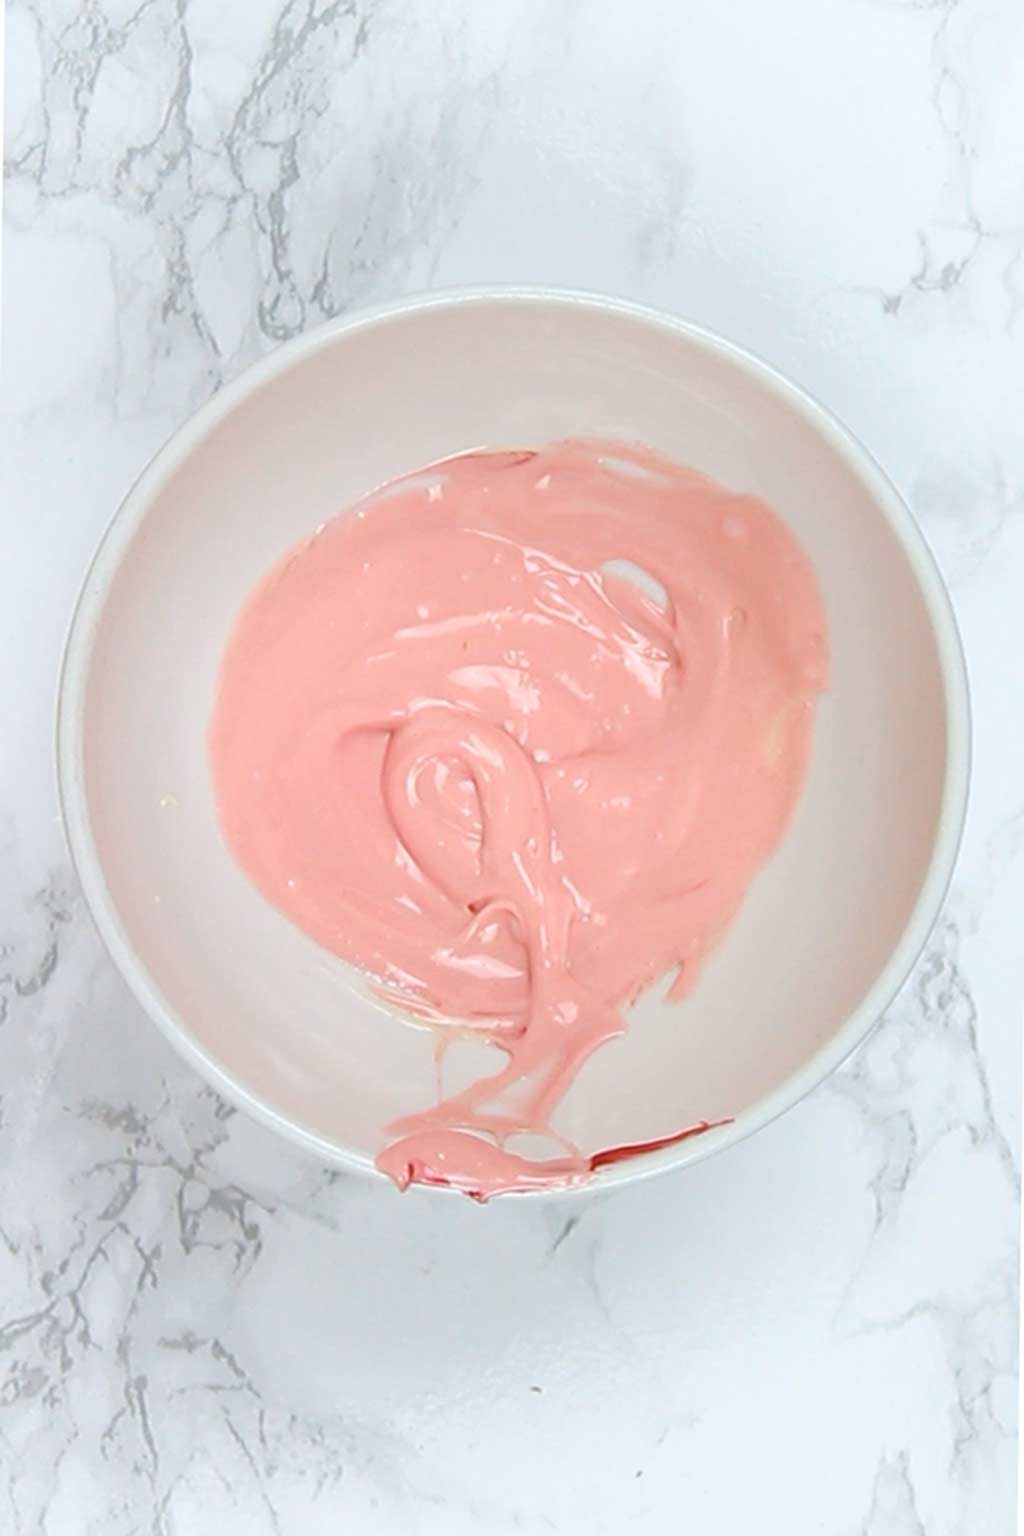 pink melted chocolate in a bowl